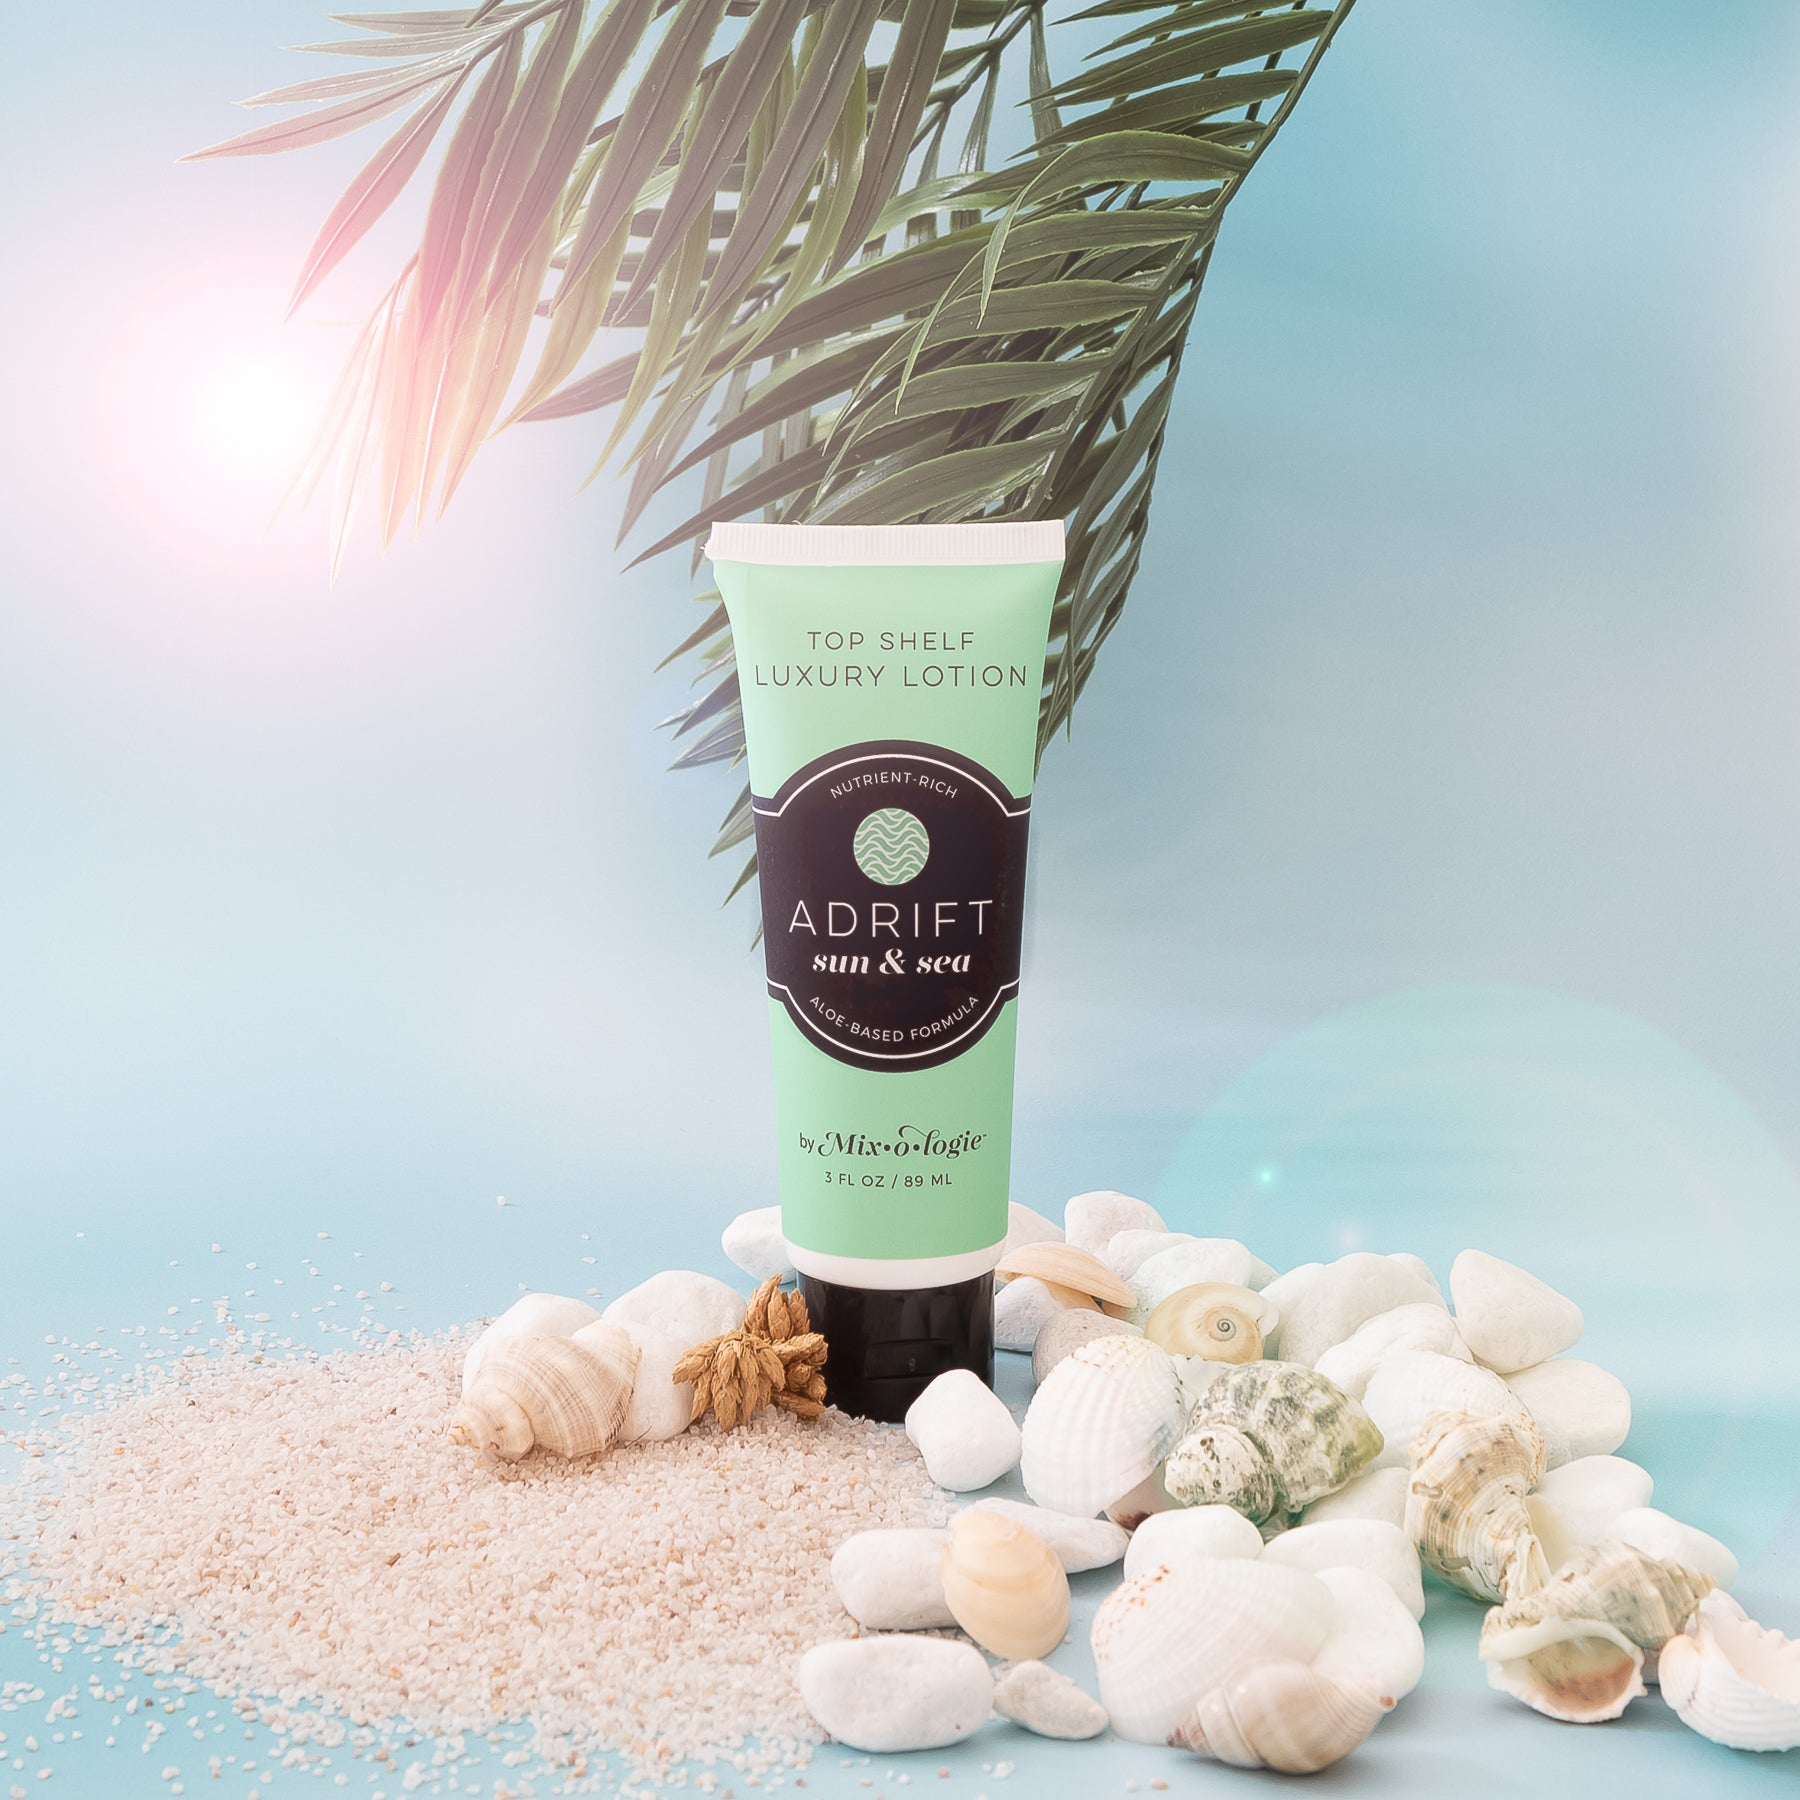 Adrift sun & sea aloe based lotion in 3 FL oz tube. Displayed on sand with shells and greenery. 